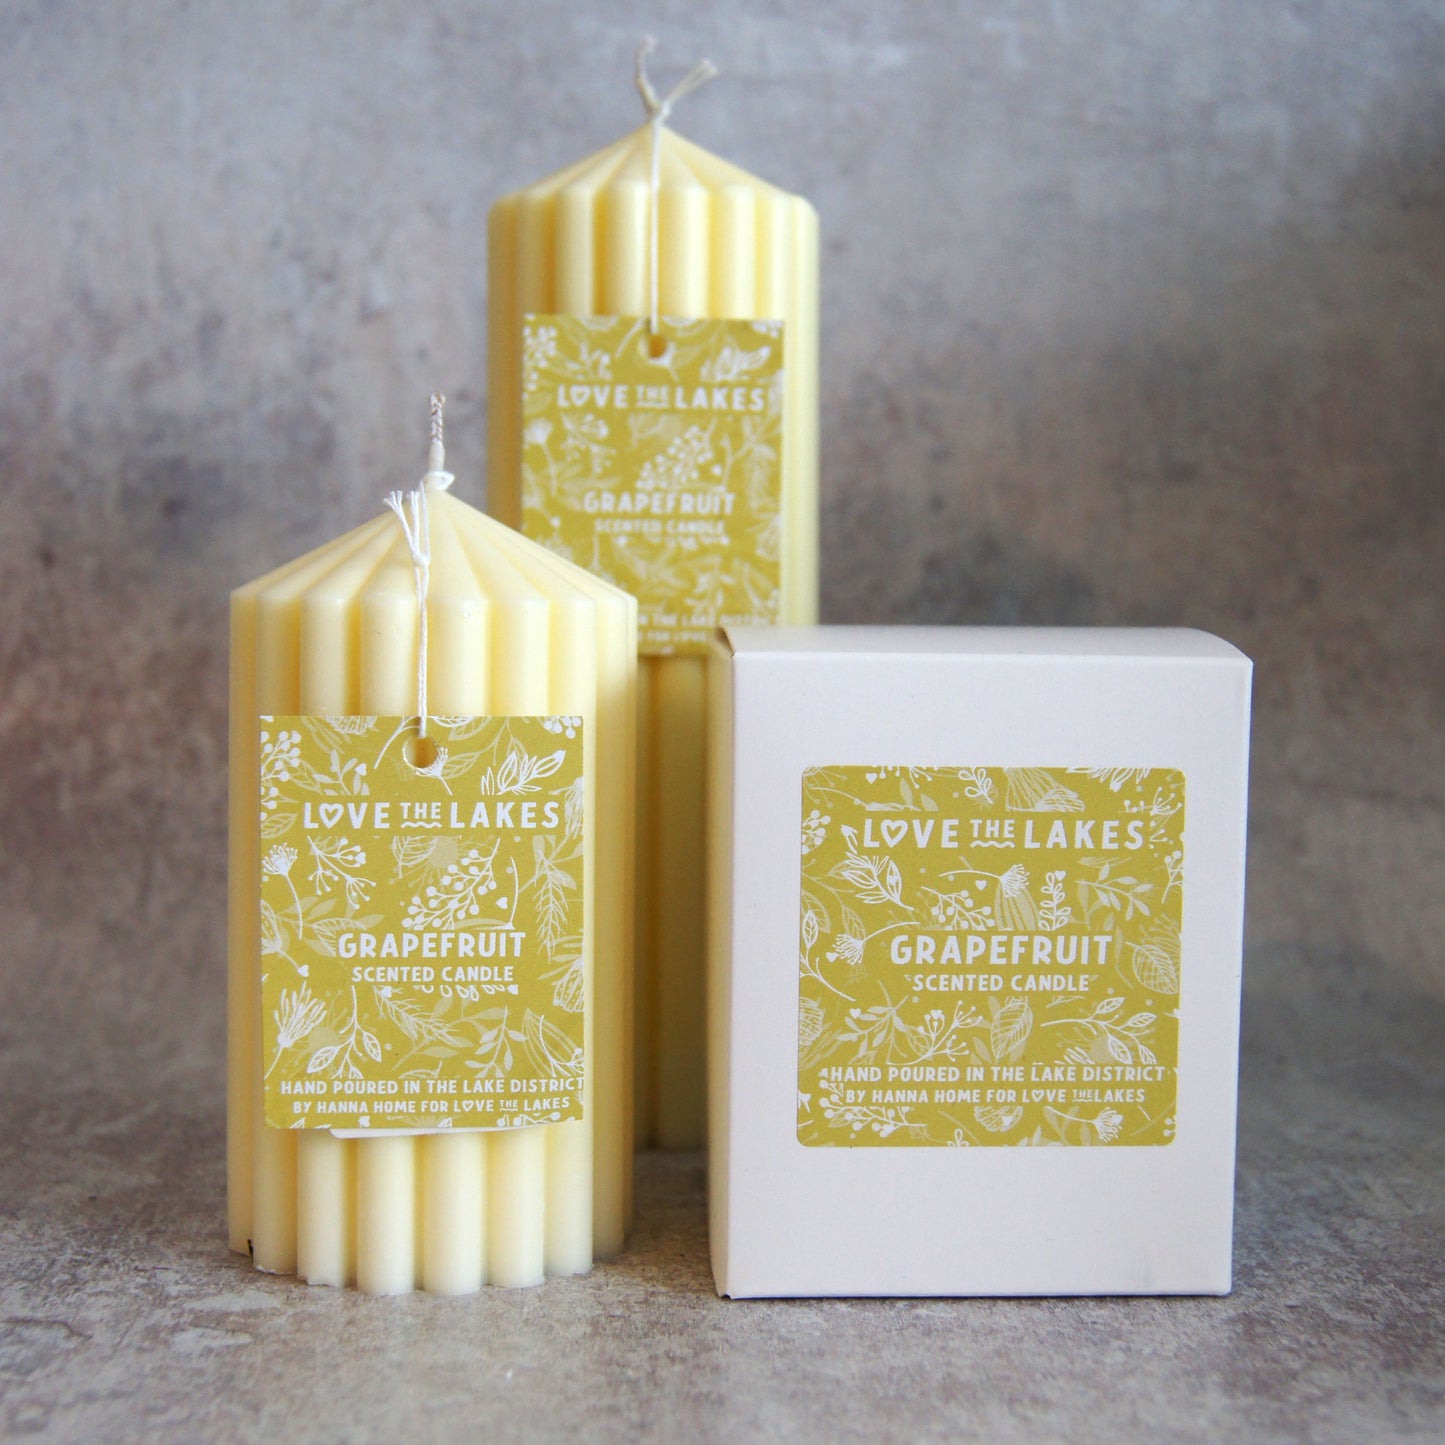 Grapefruit Scented Soy Wax Pillar Candle - 2 sizes